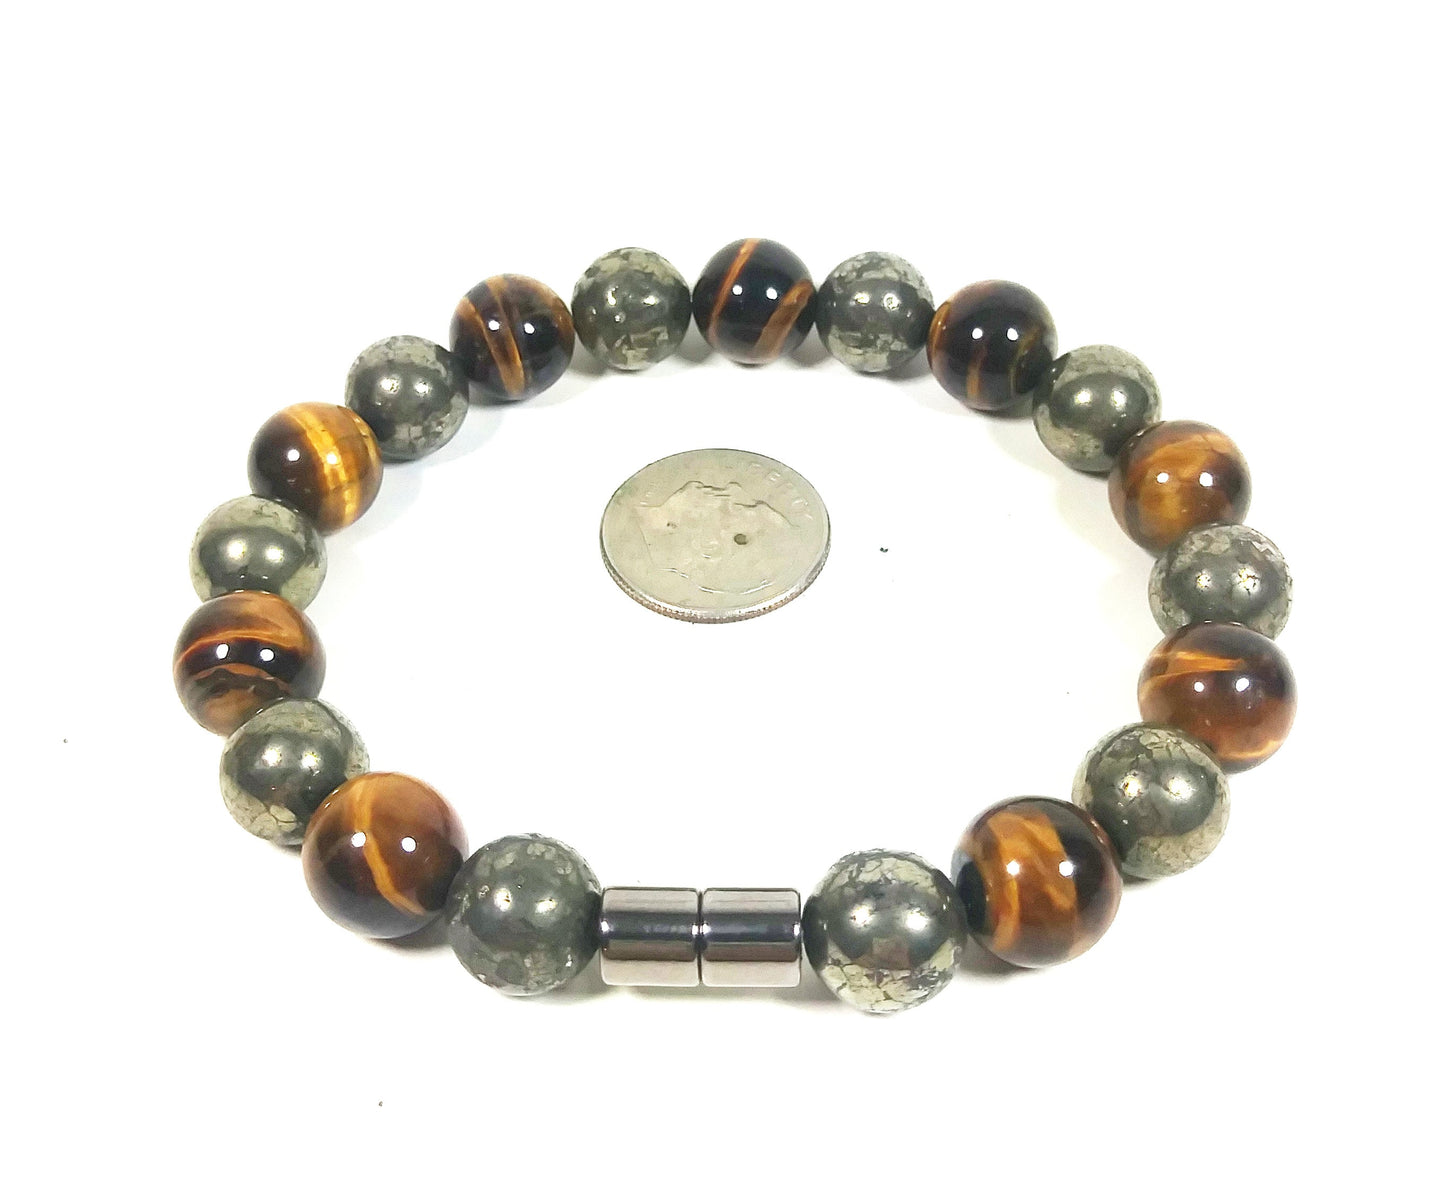 Pyrite & Tiger Eye Bead Bracelet For Men And Women - Confidence - Good Luck - Super Strong Magnetic Clasp